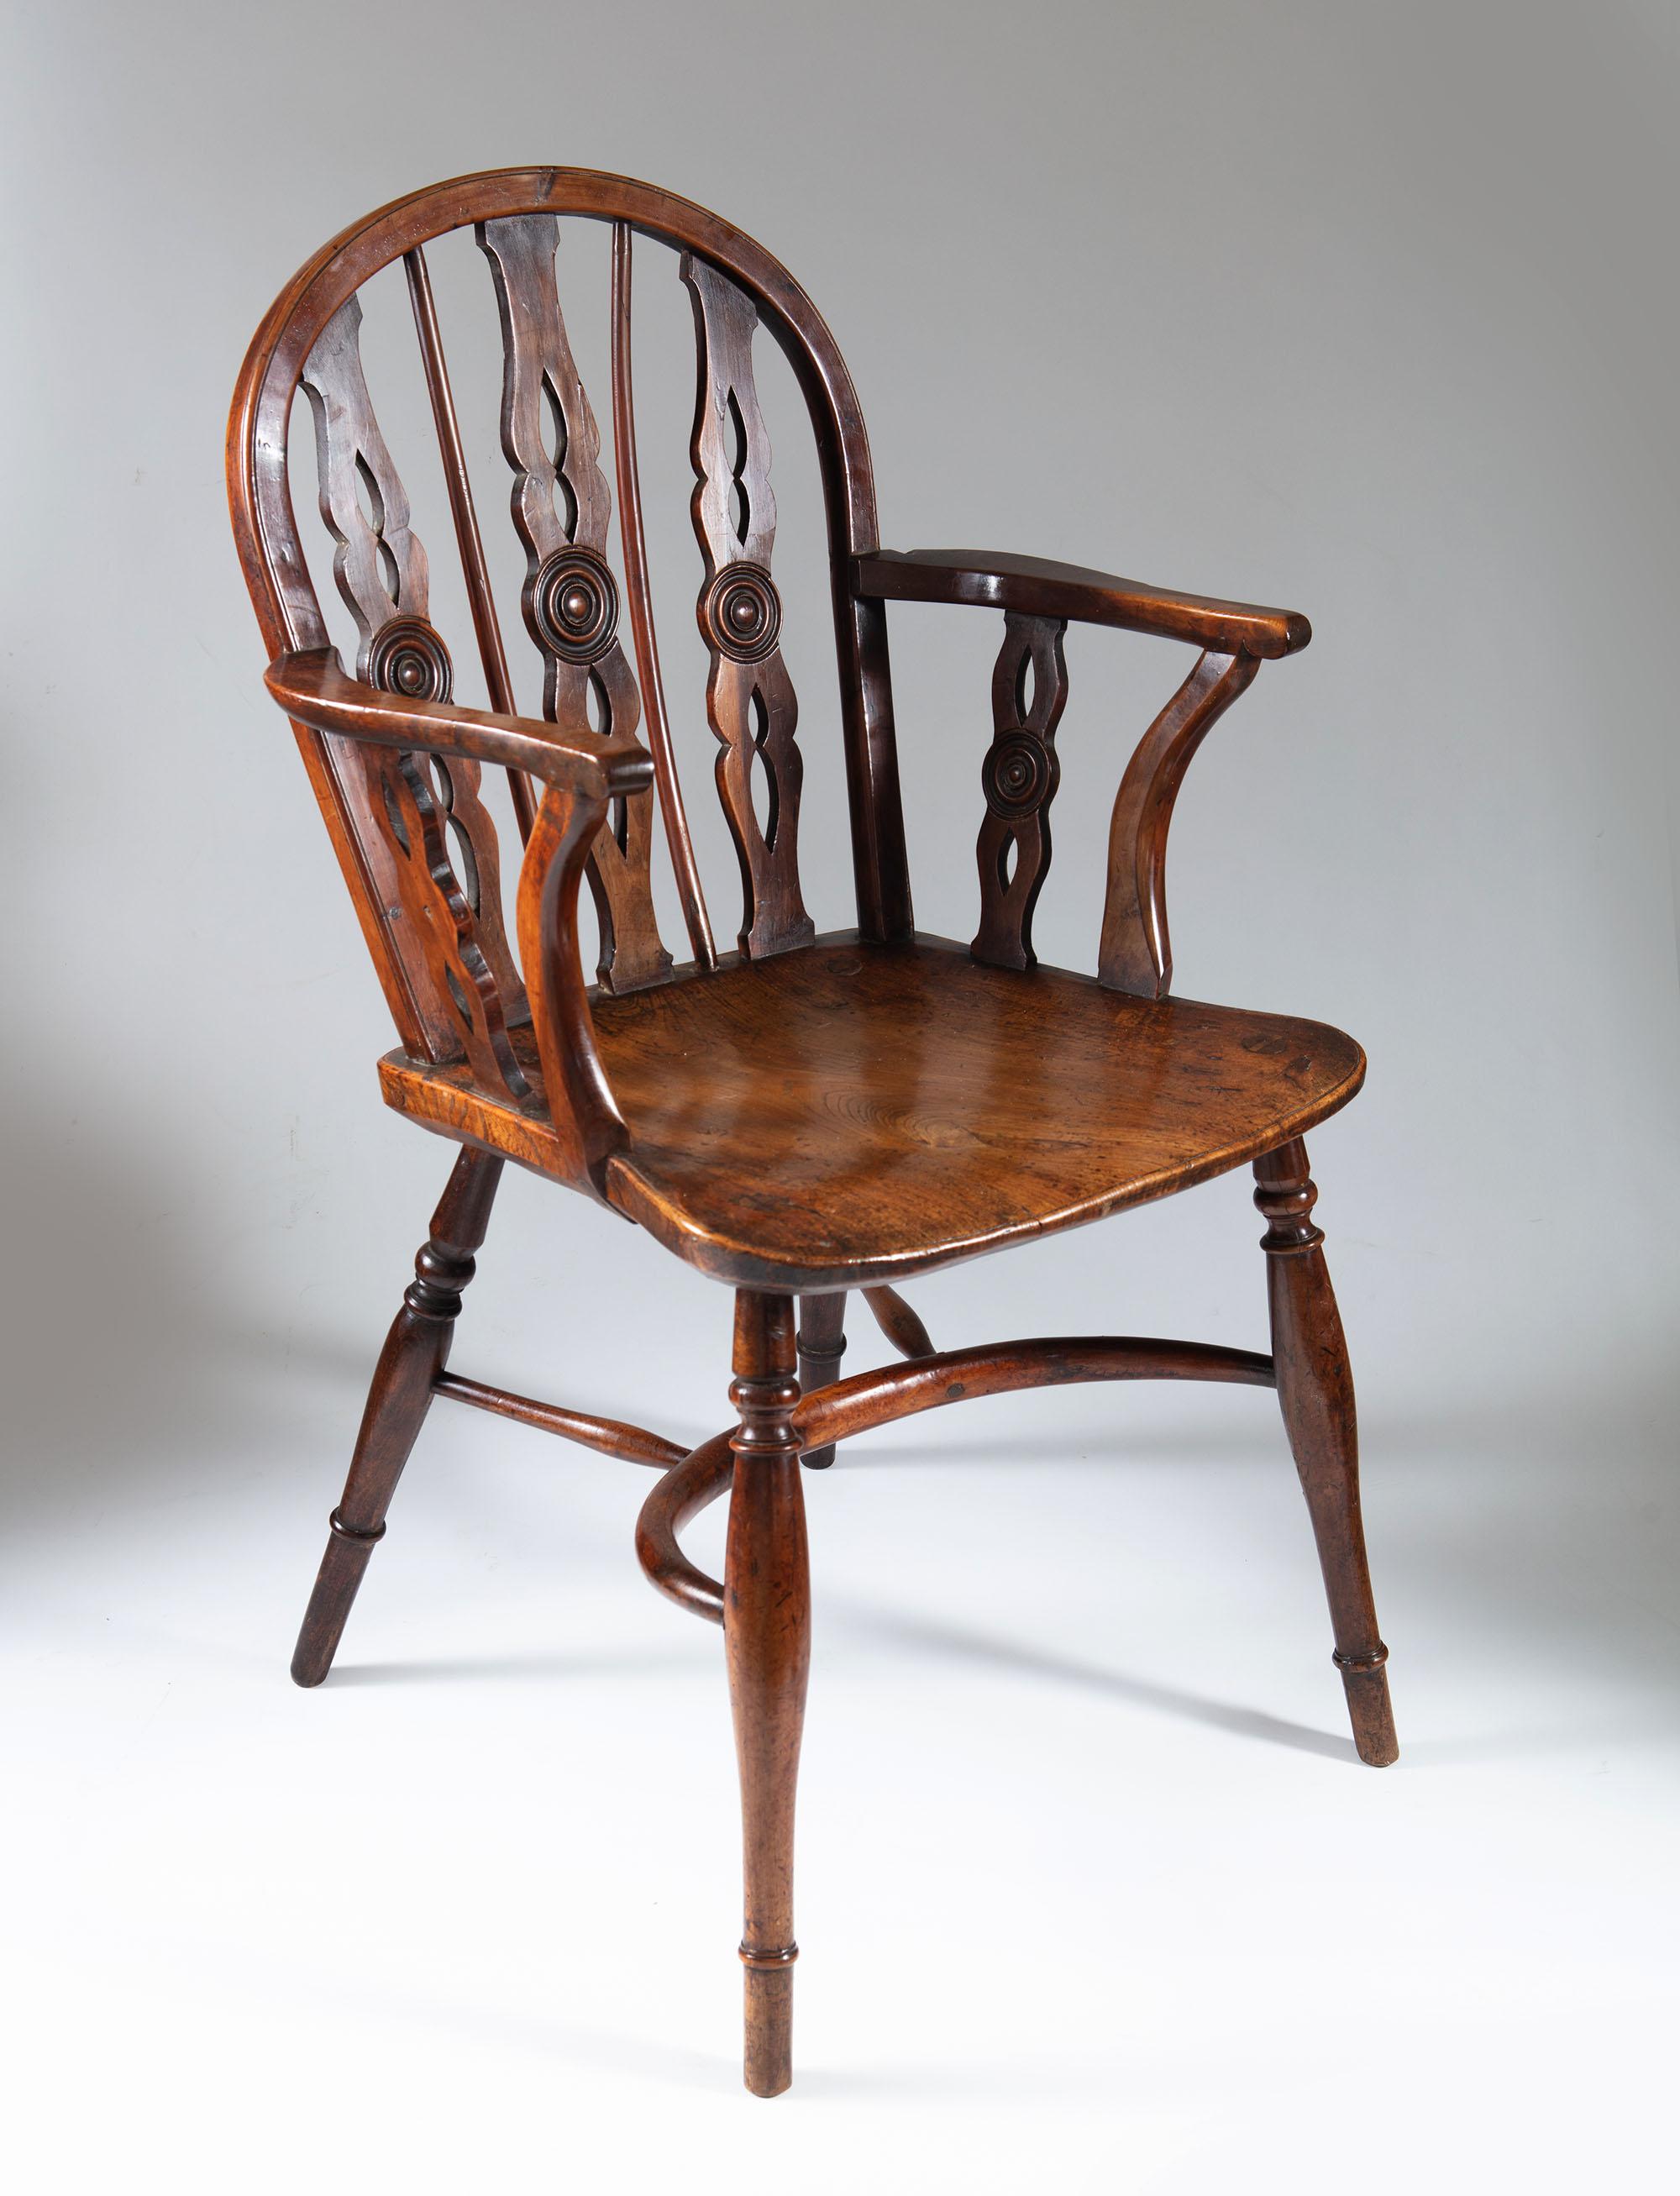 Set of Eight Wheel Back Elm and Yew Windsor Chairs In Good Condition In London, by appointment only